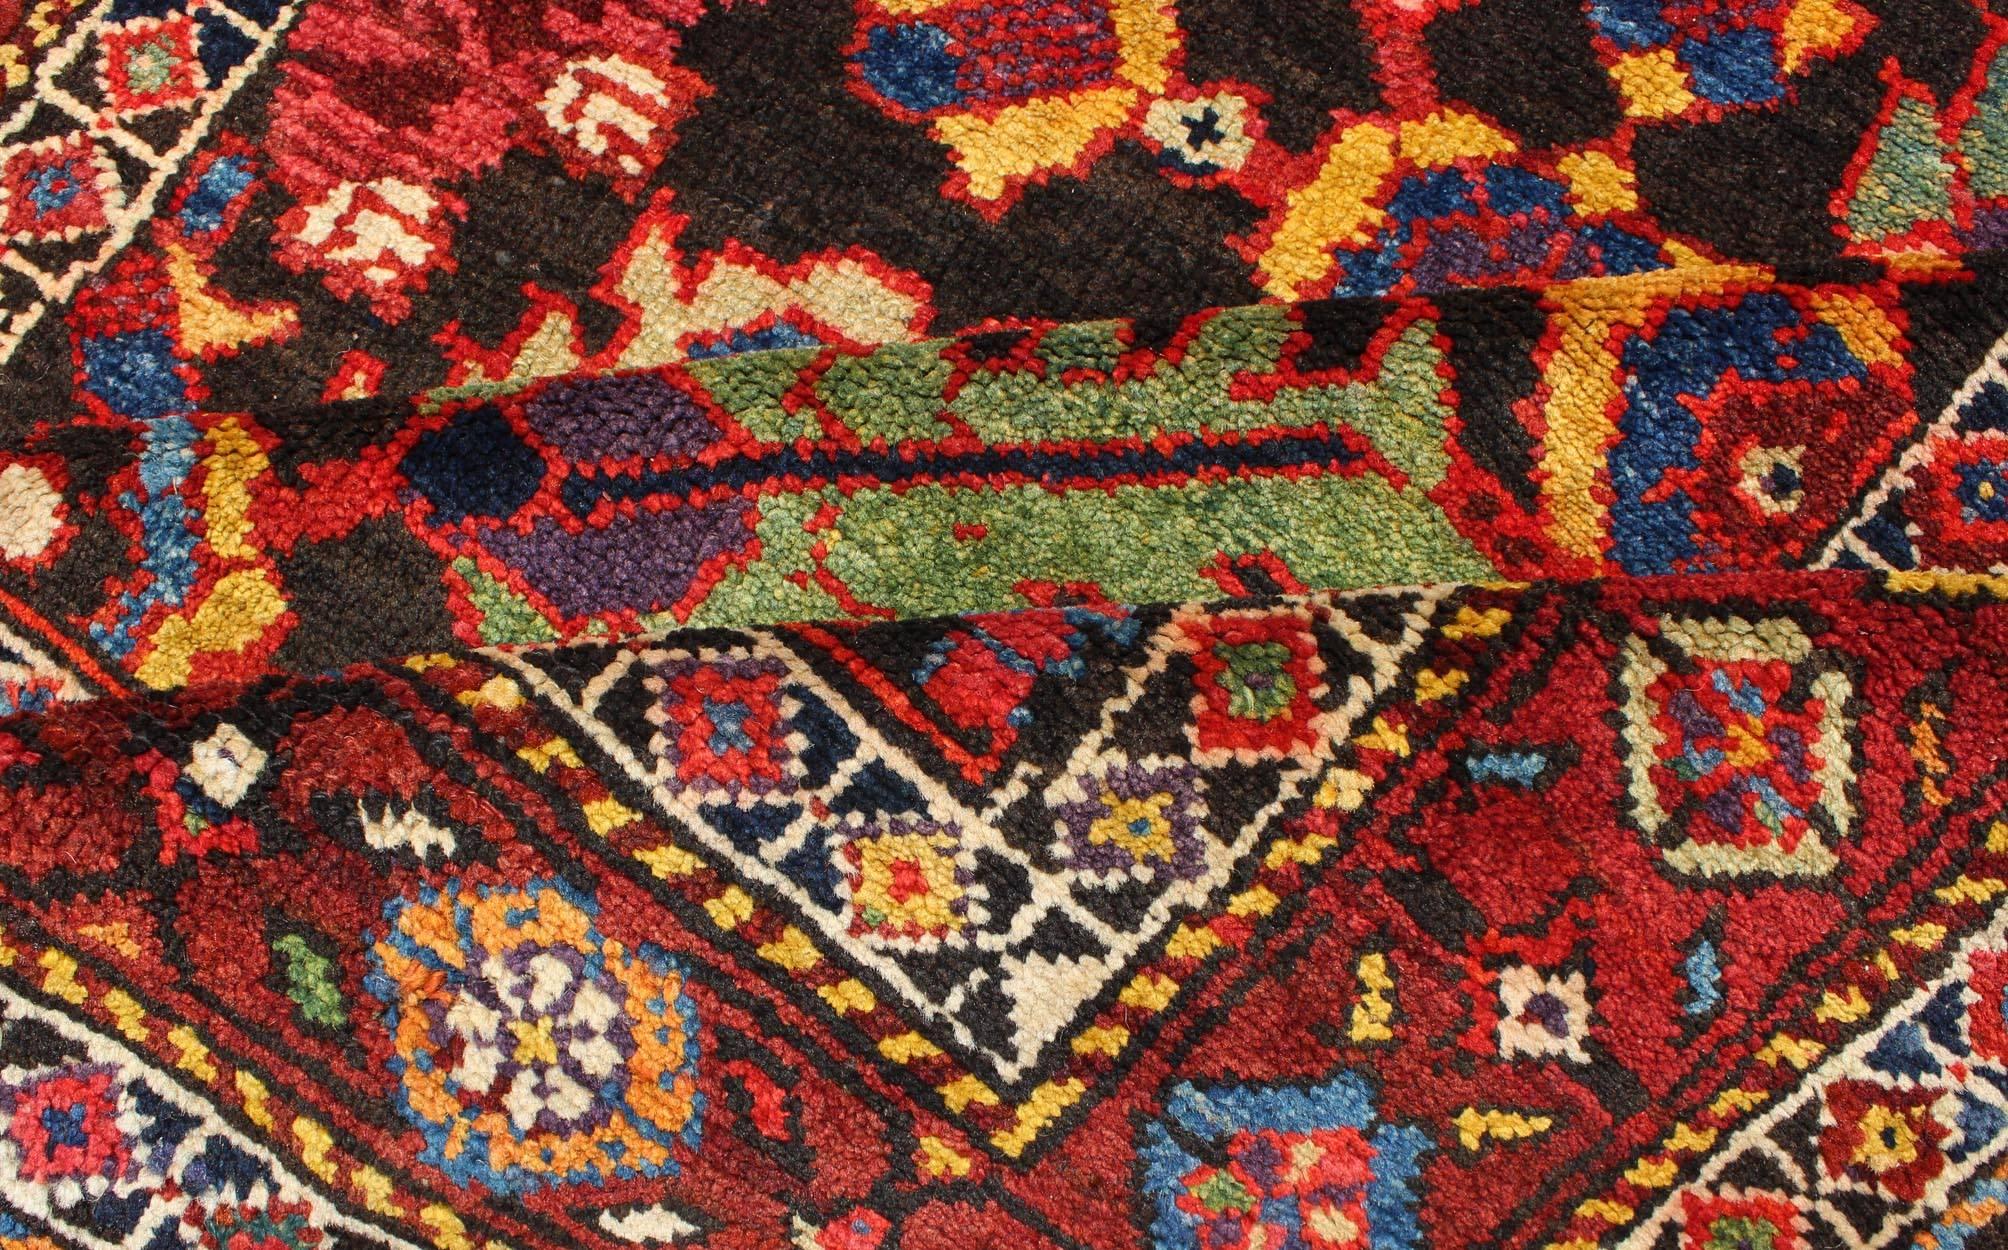 Early 20th Century Colorful Jewel-Toned Antique Caucasian Karabagh Runner with Tribal Design For Sale